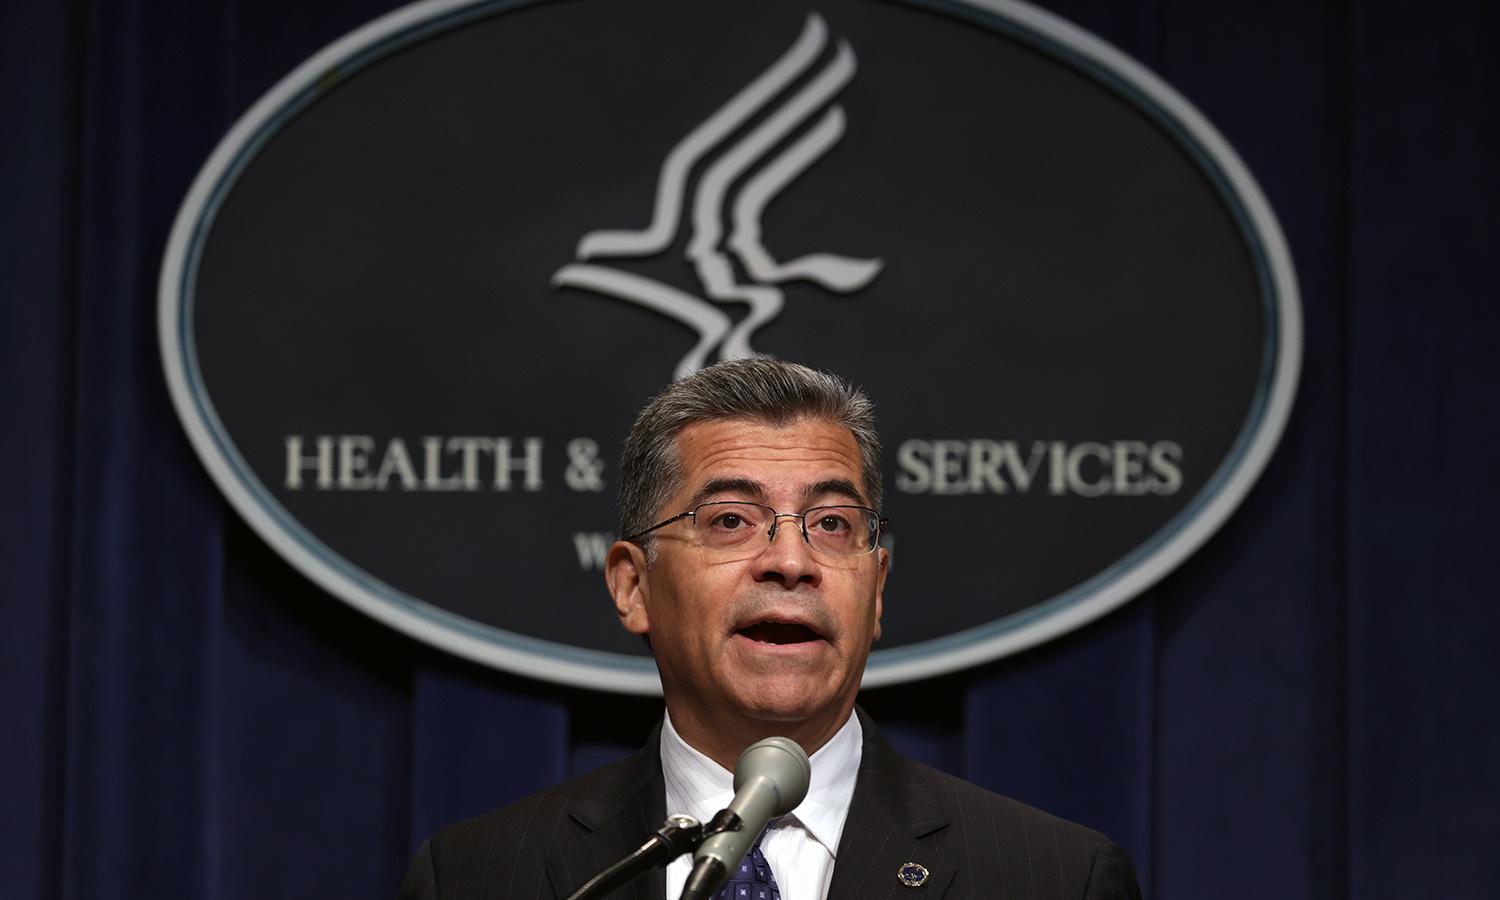 U.S. Secretary of Health and Human Services Xavier Becerra speaks during a June 28 news conference at the HHS headquarters in Washington &#8220;to unveil an action plan at President Biden&#8217;s direction&#8221; in response to the Supreme Court‘s 6-3 Dobbs v. Jackson Women&#8217;s Health decision. (Photo by Alex Wong/Getty Images)